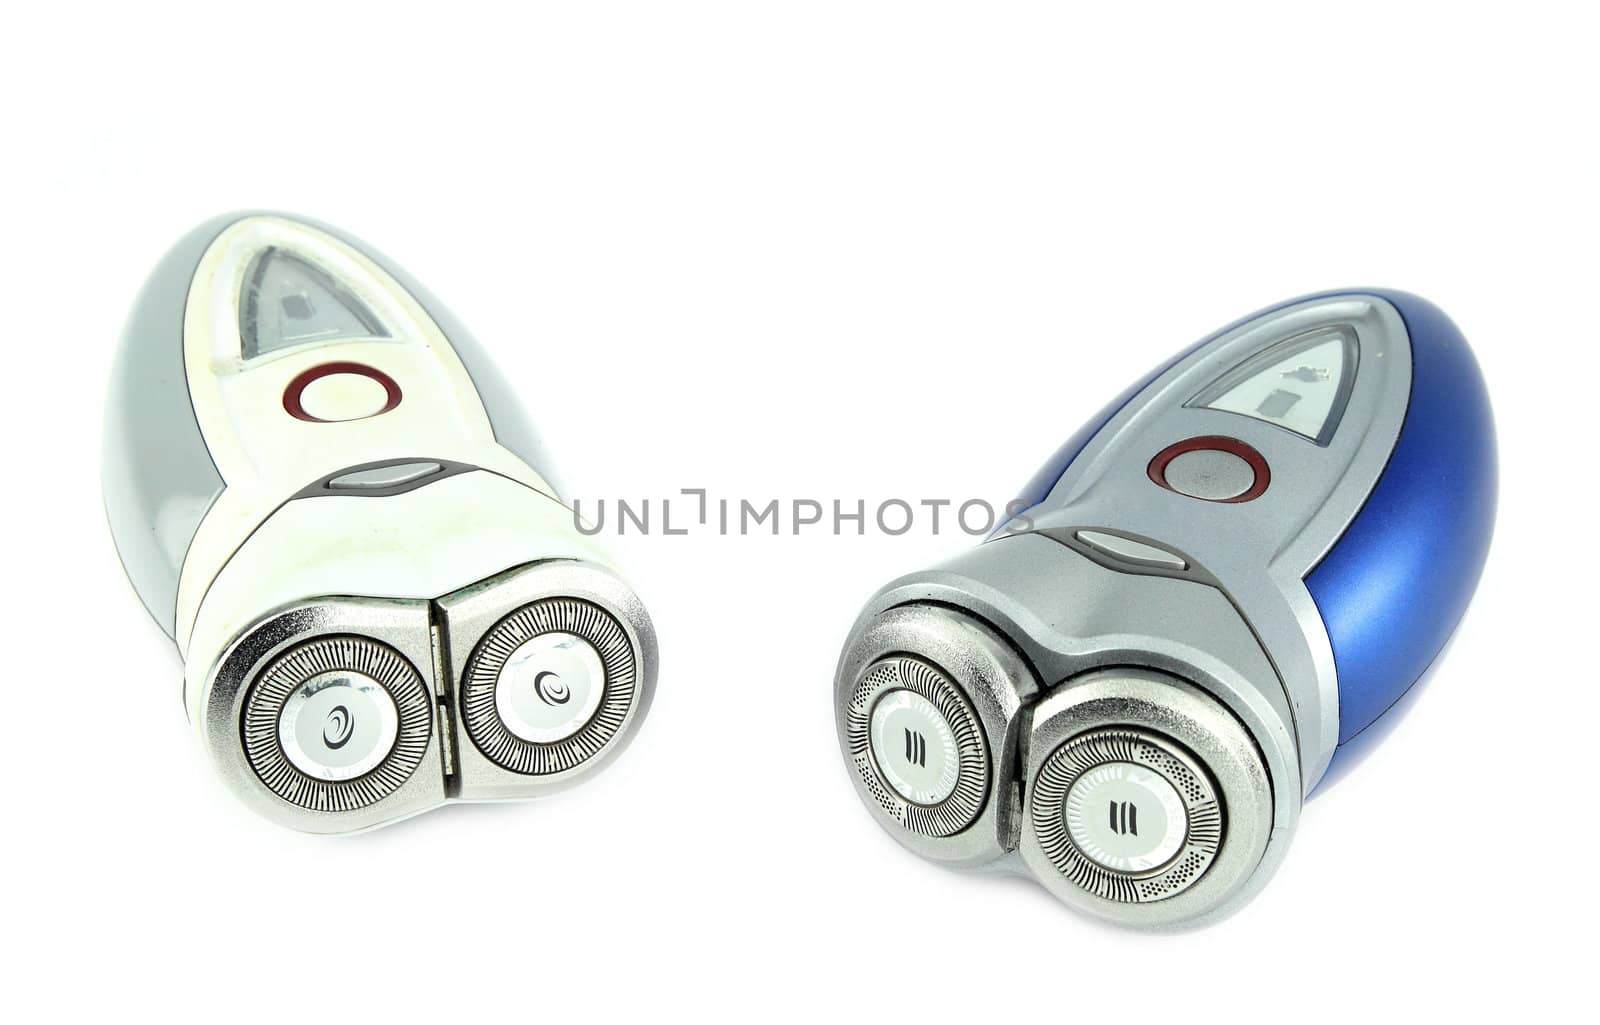 two electric shaver isolated with white background